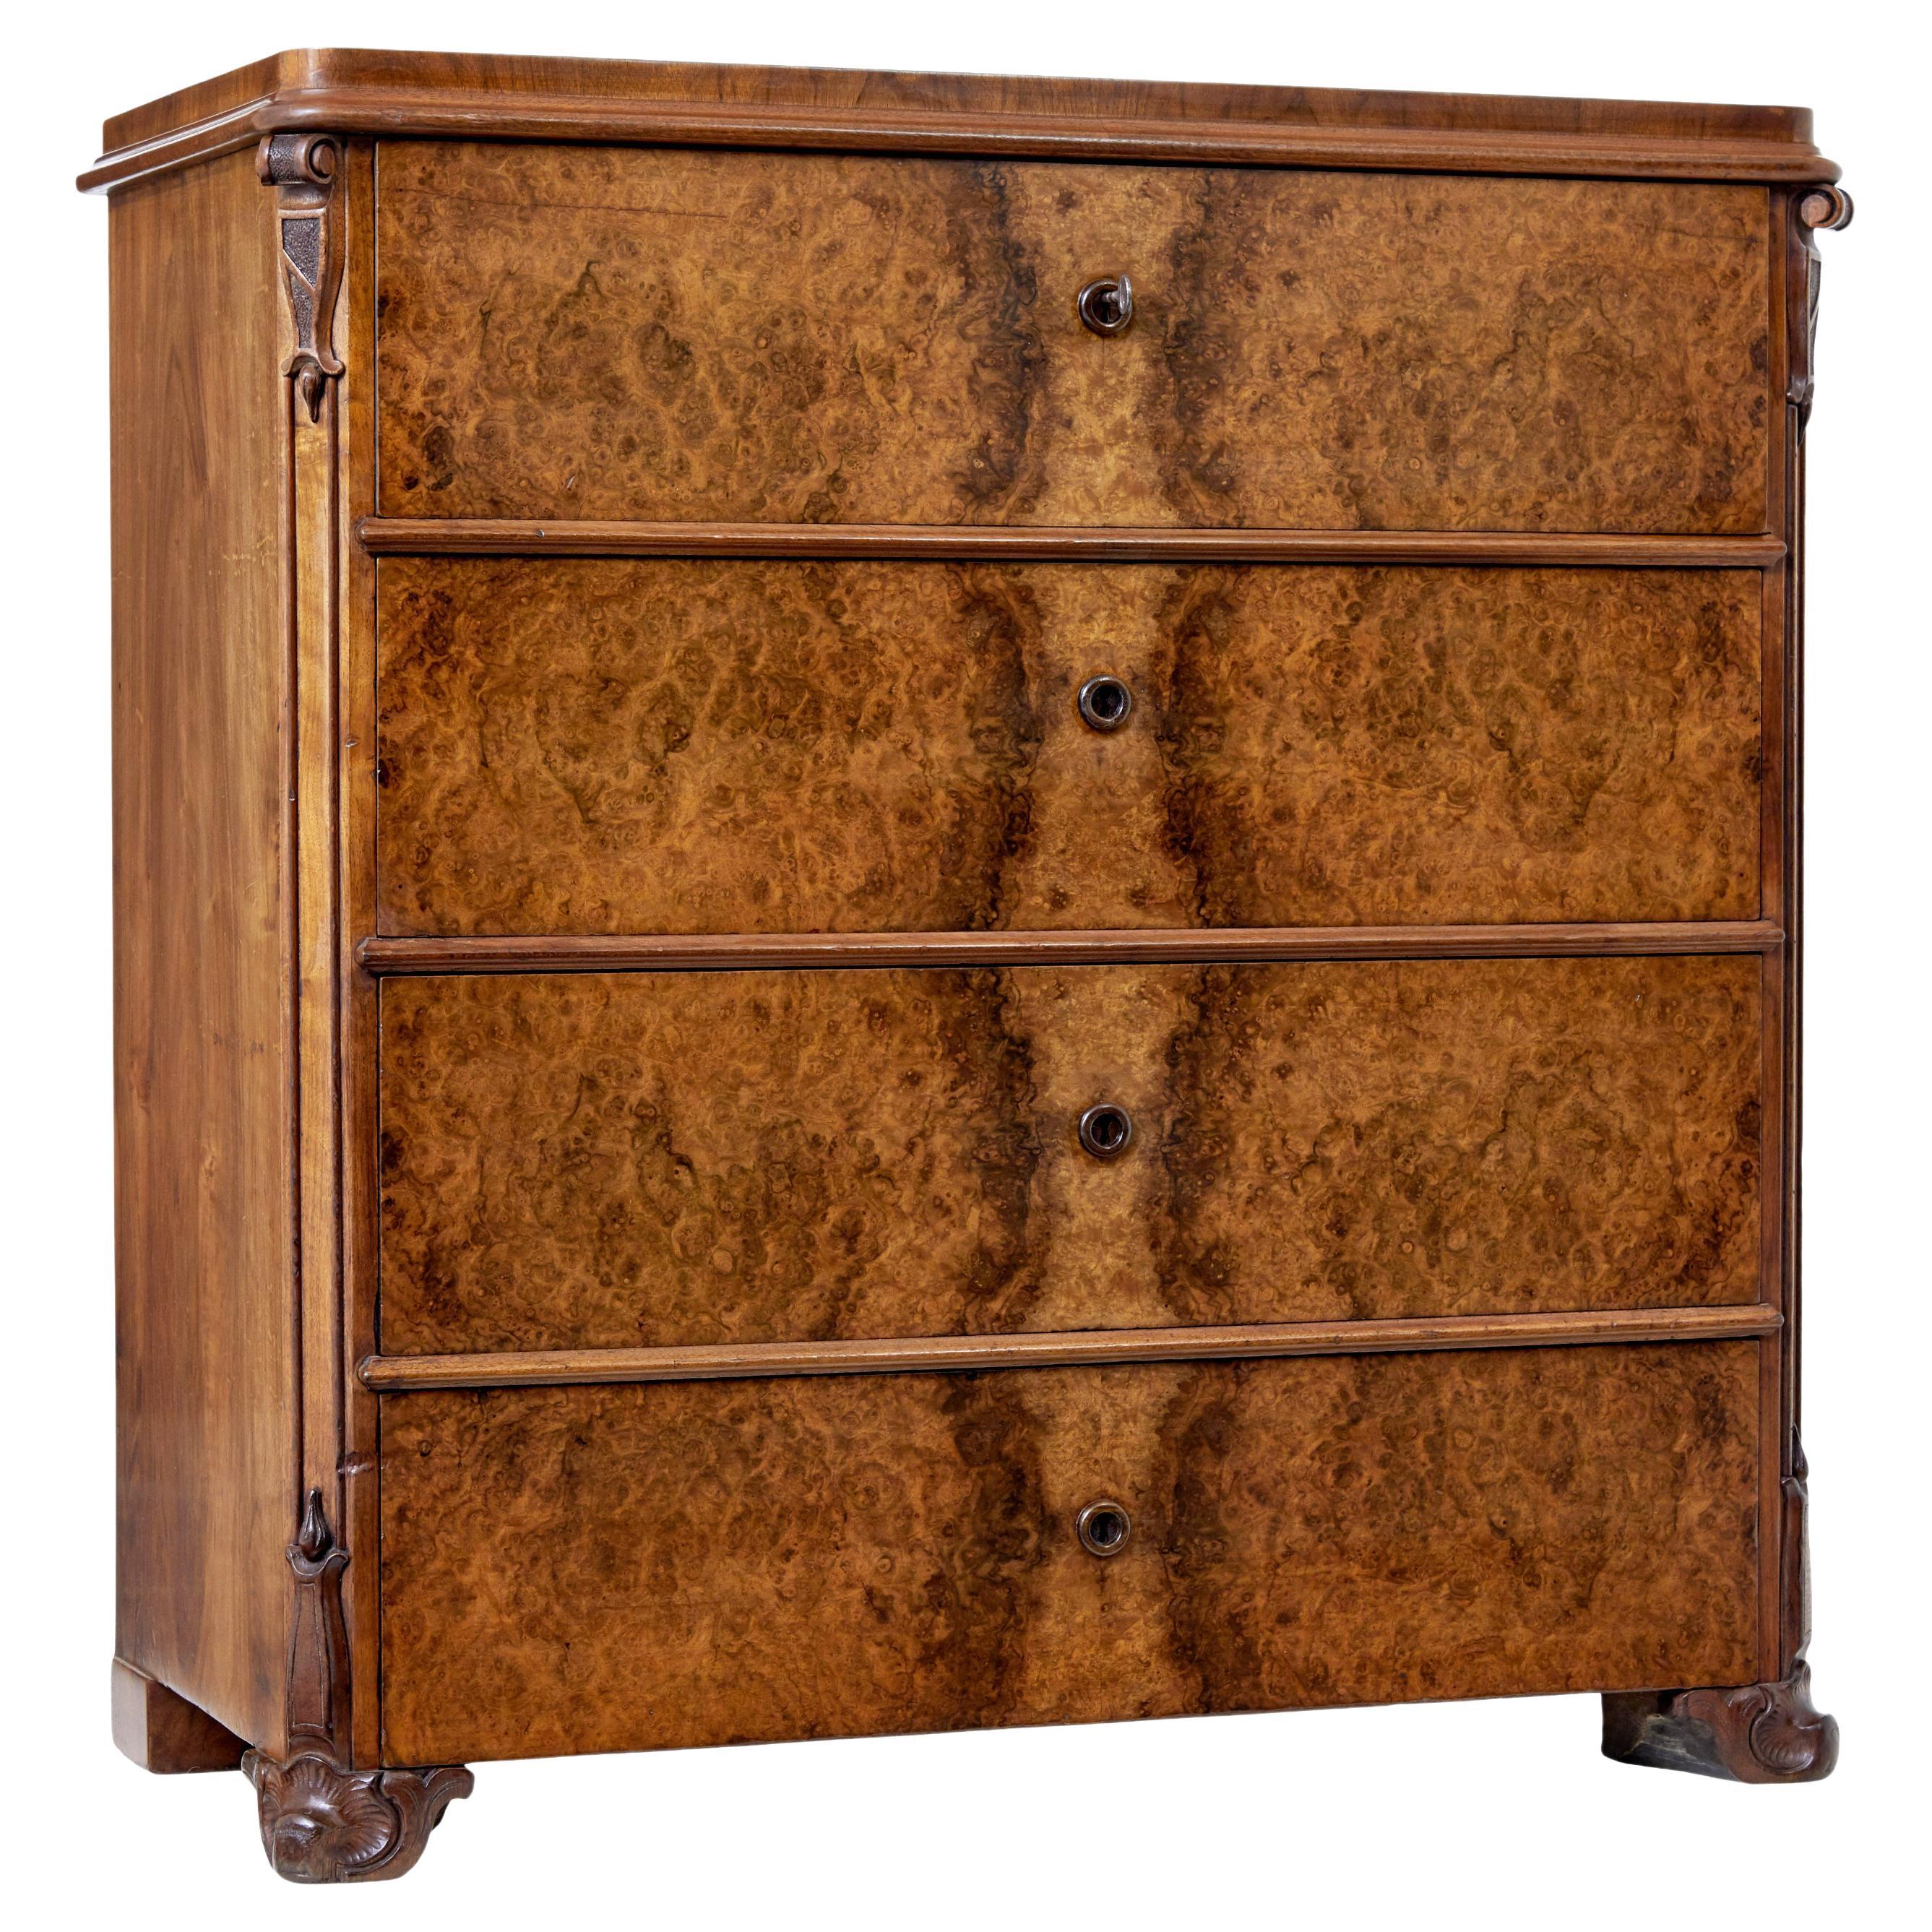 19th century burr walnut chest of drawers For Sale